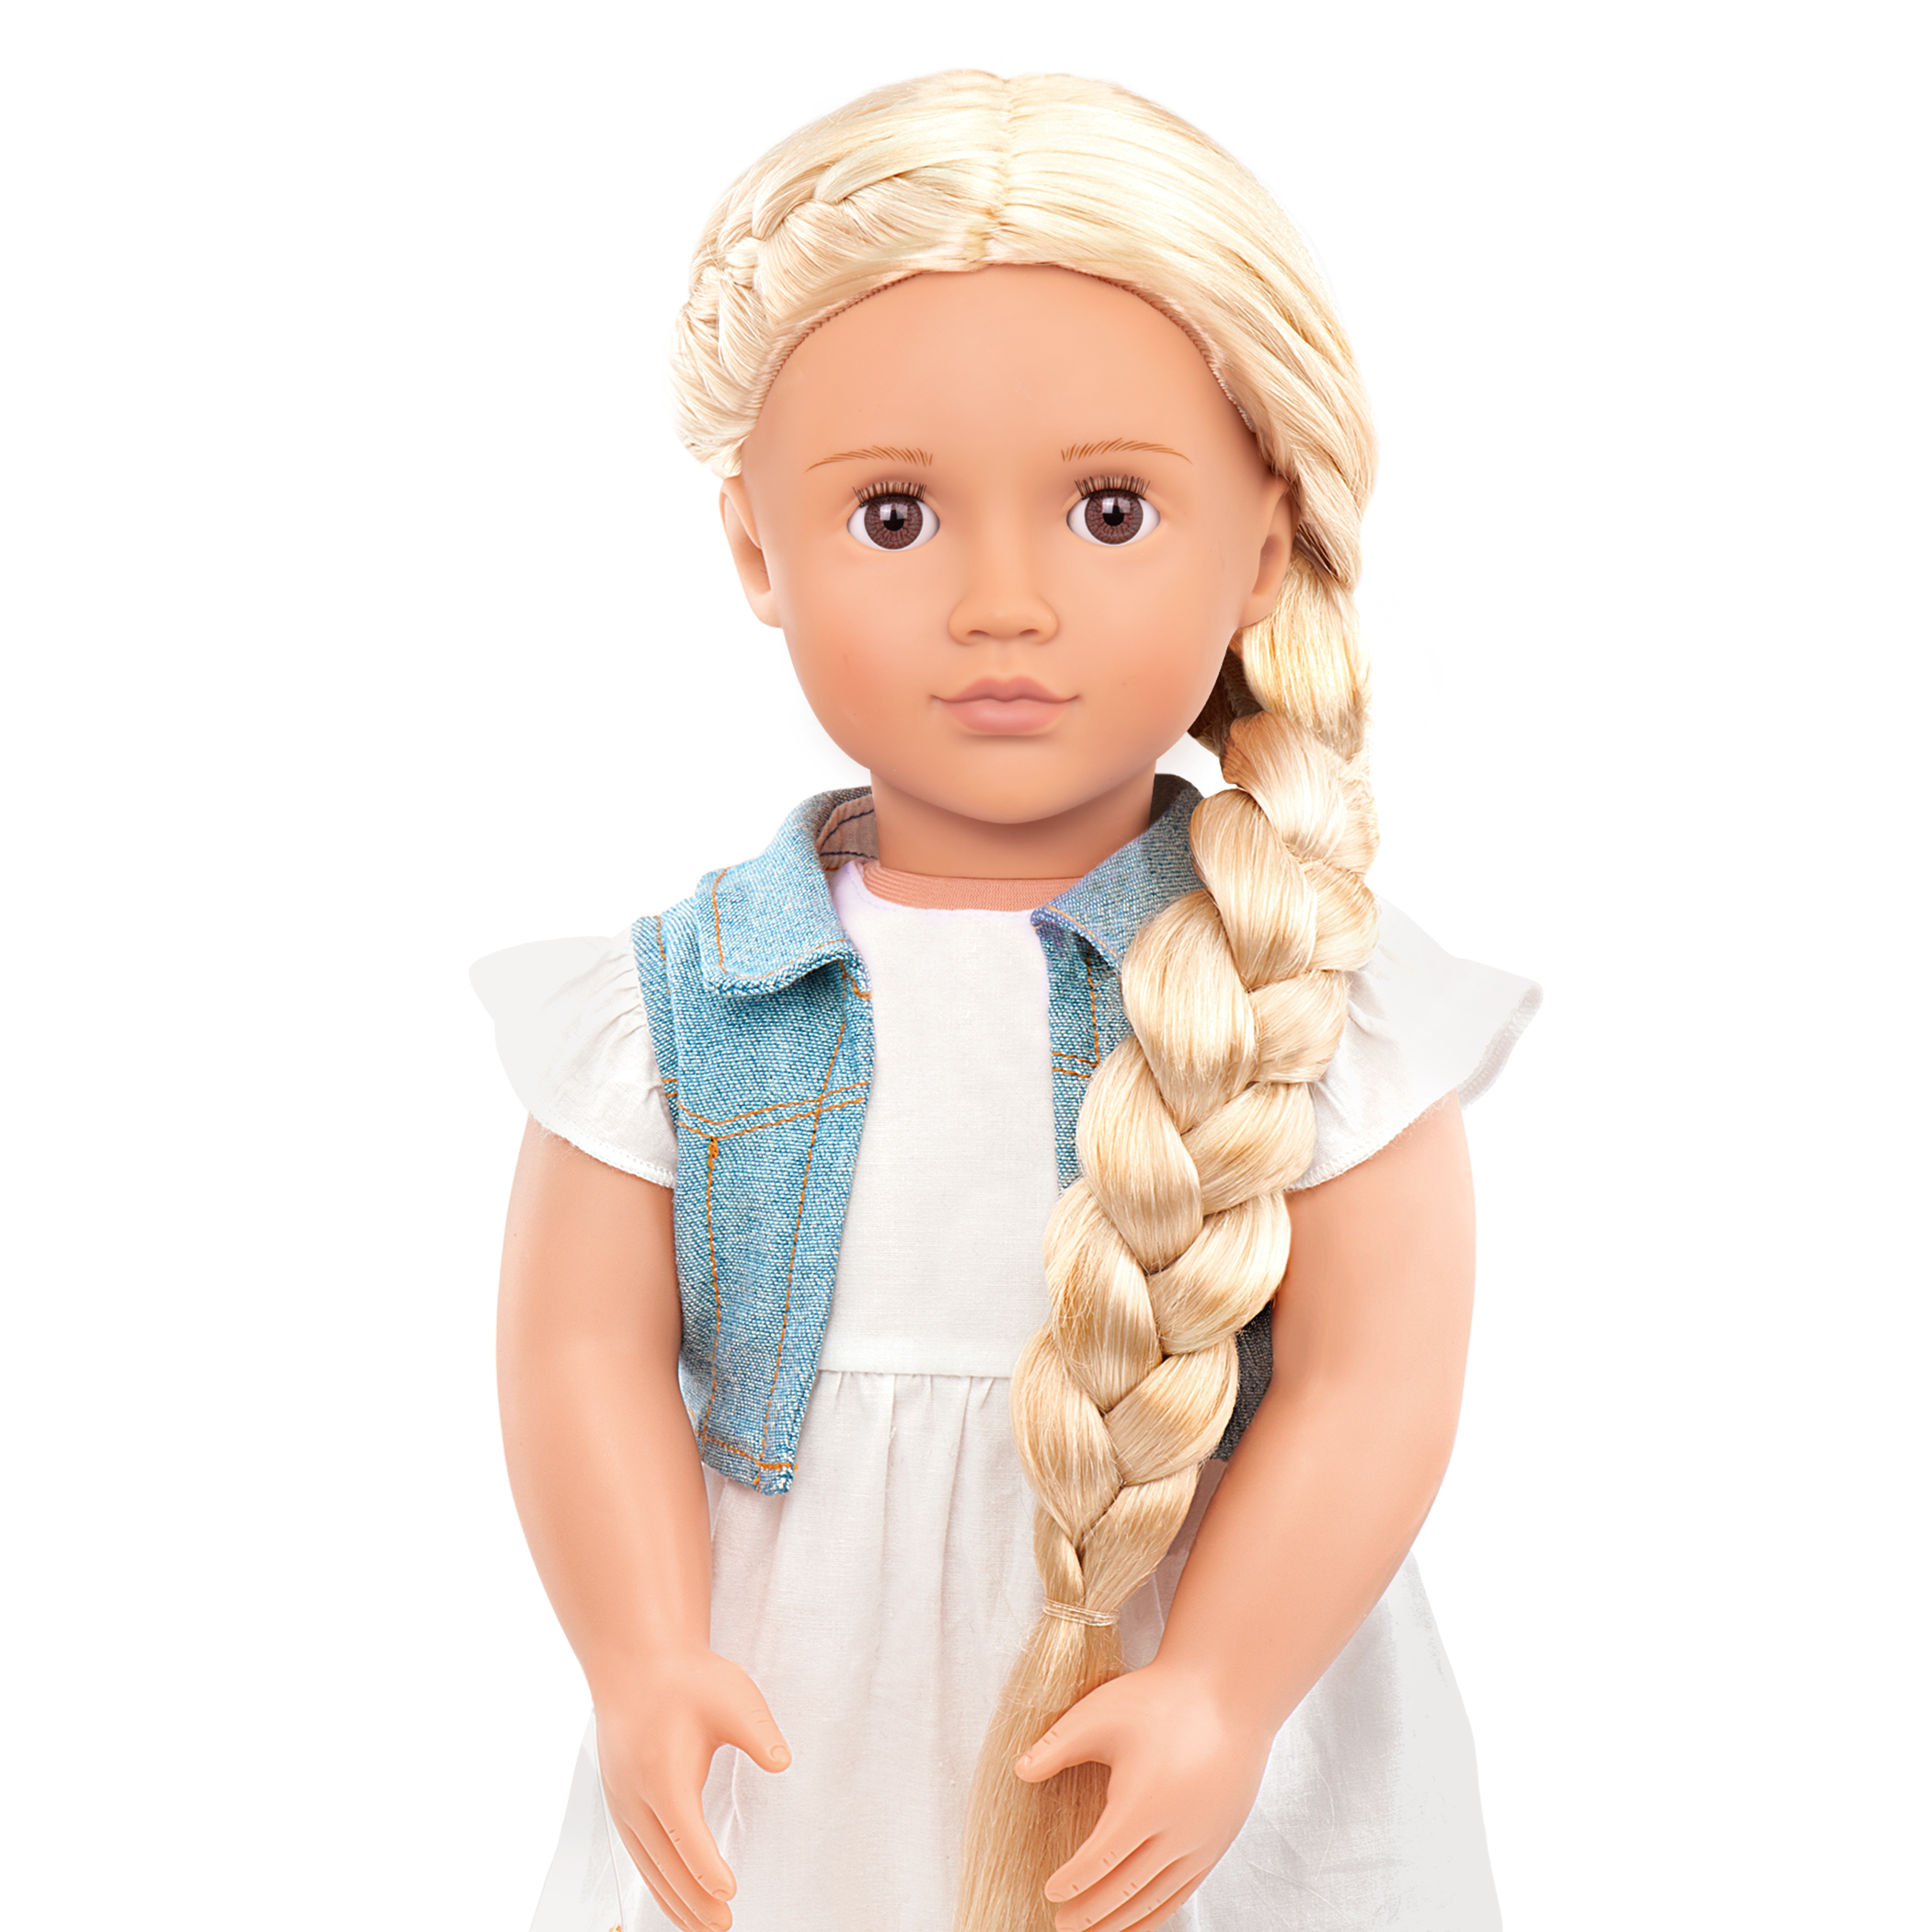 18-inch doll with blonde hair, brown eyes and extensions